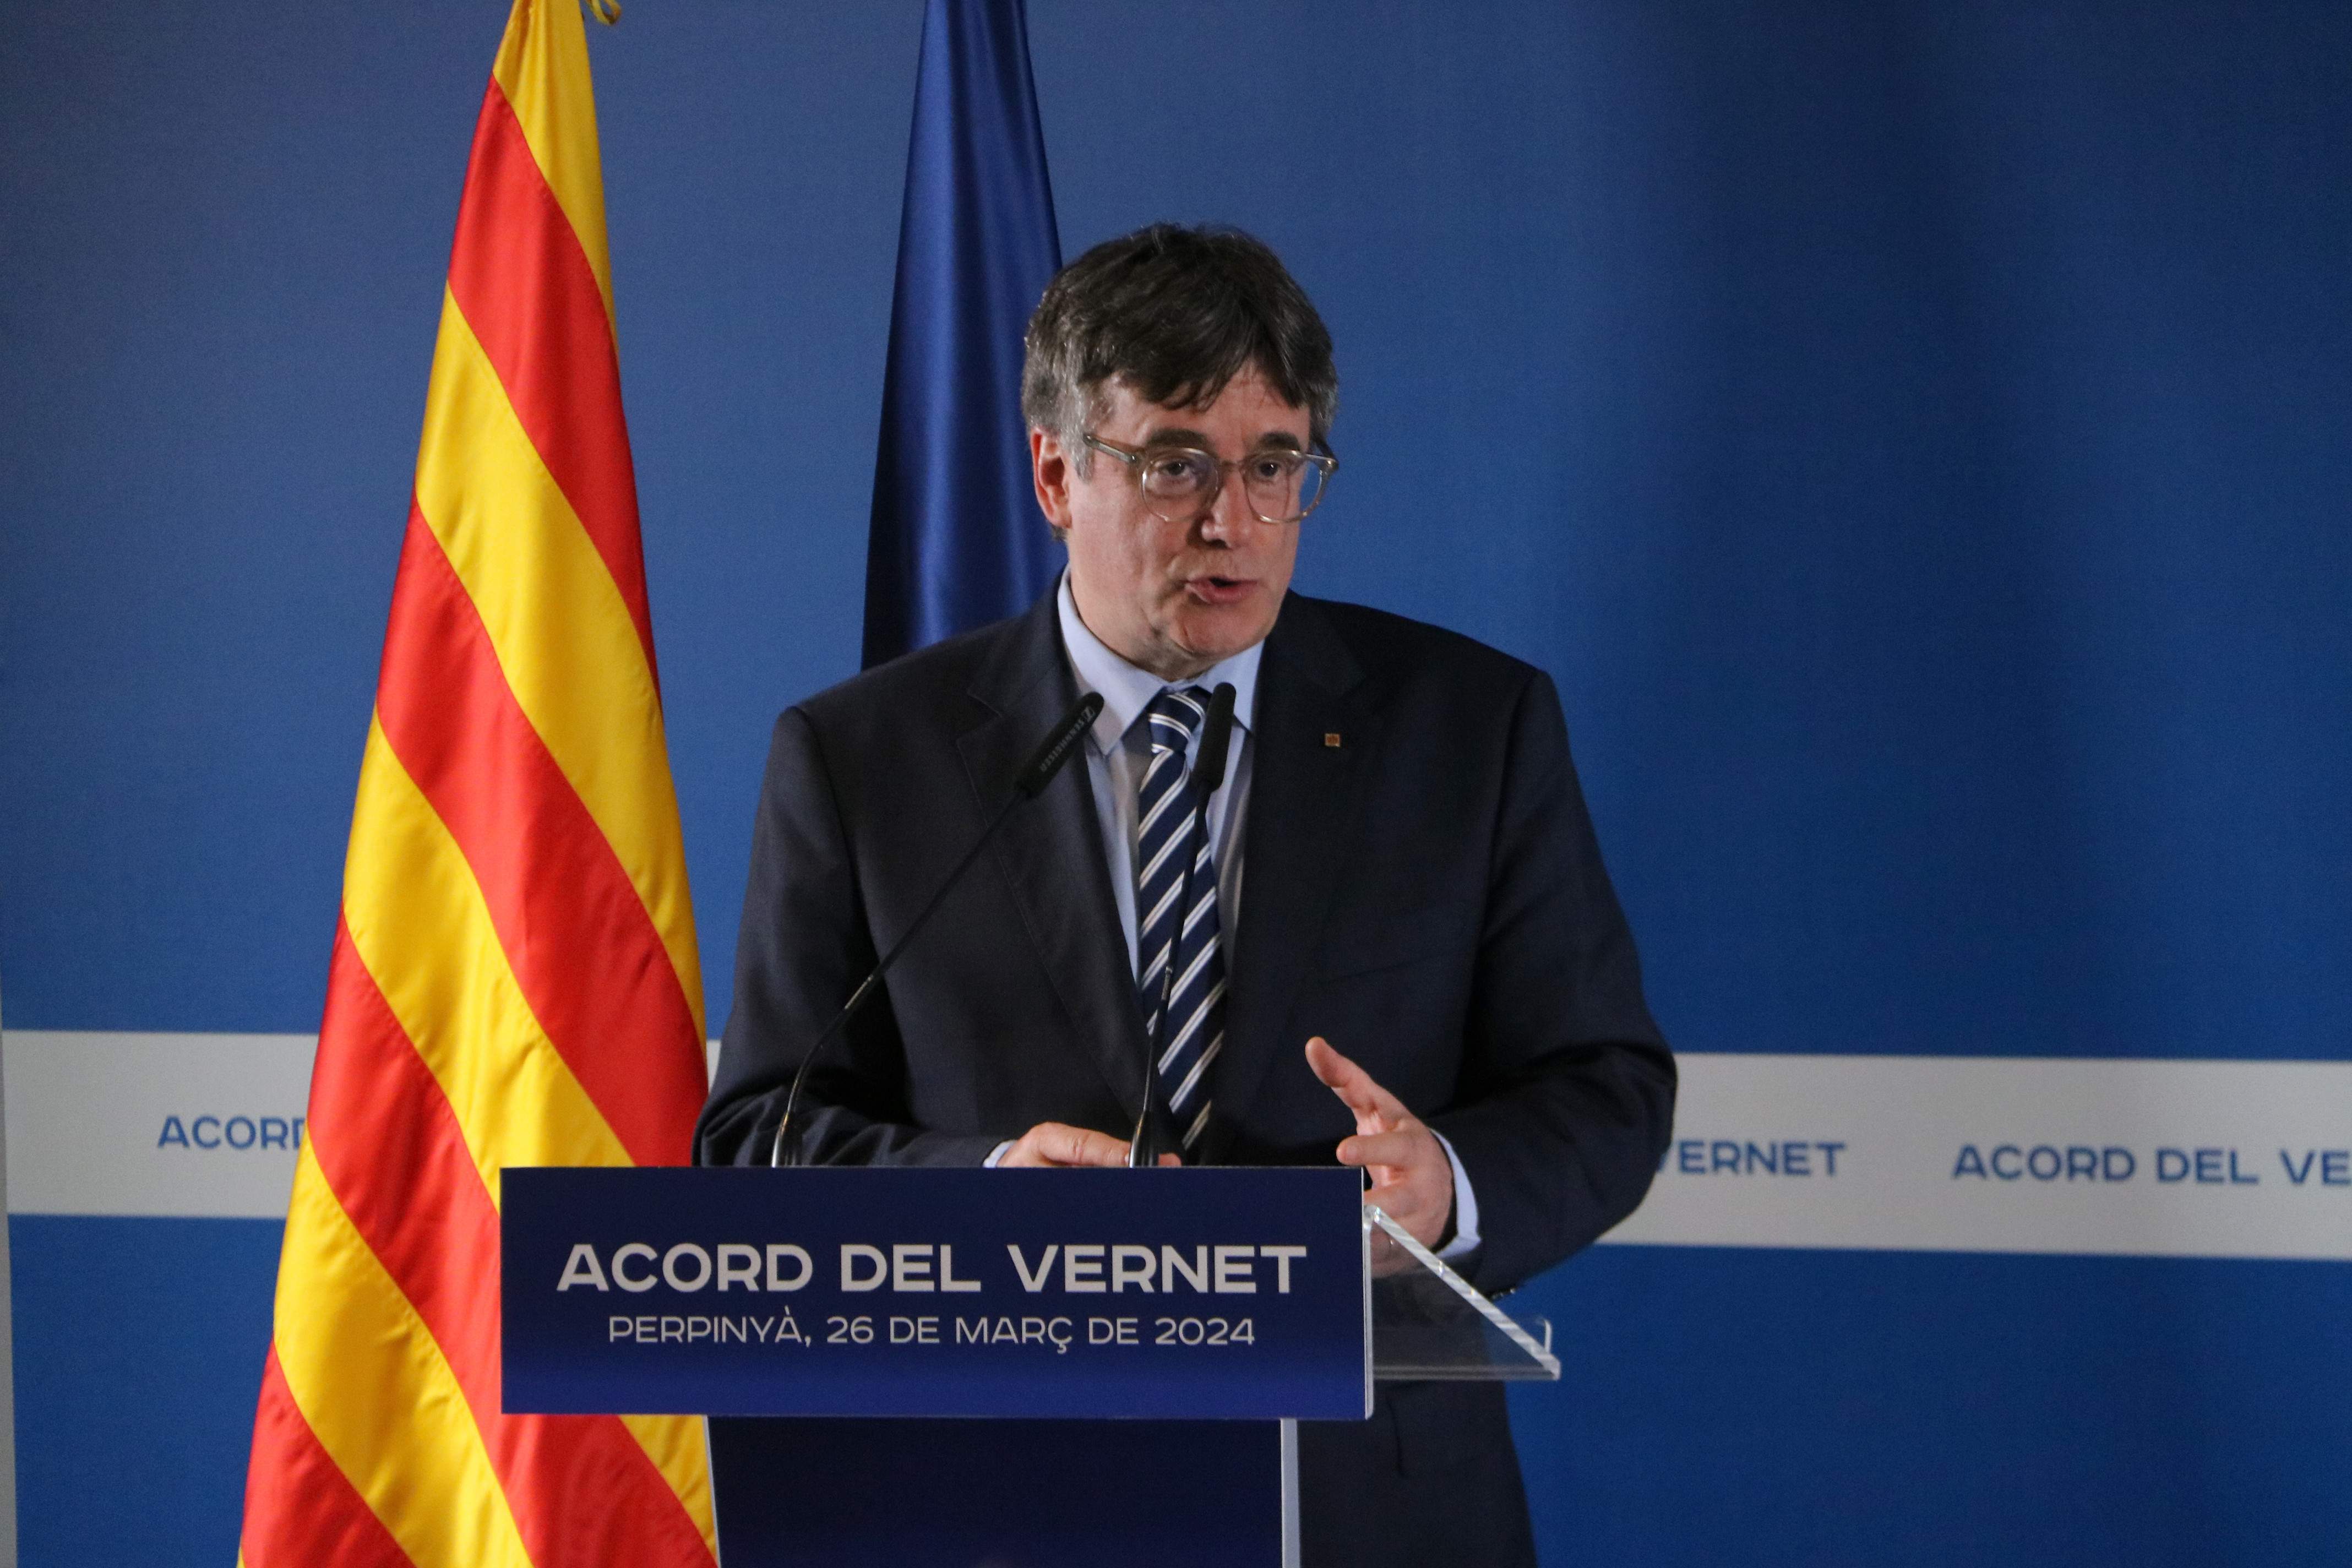 Puigdemont calls for pro-independence unity, warning: "Governments can't give in before they start"